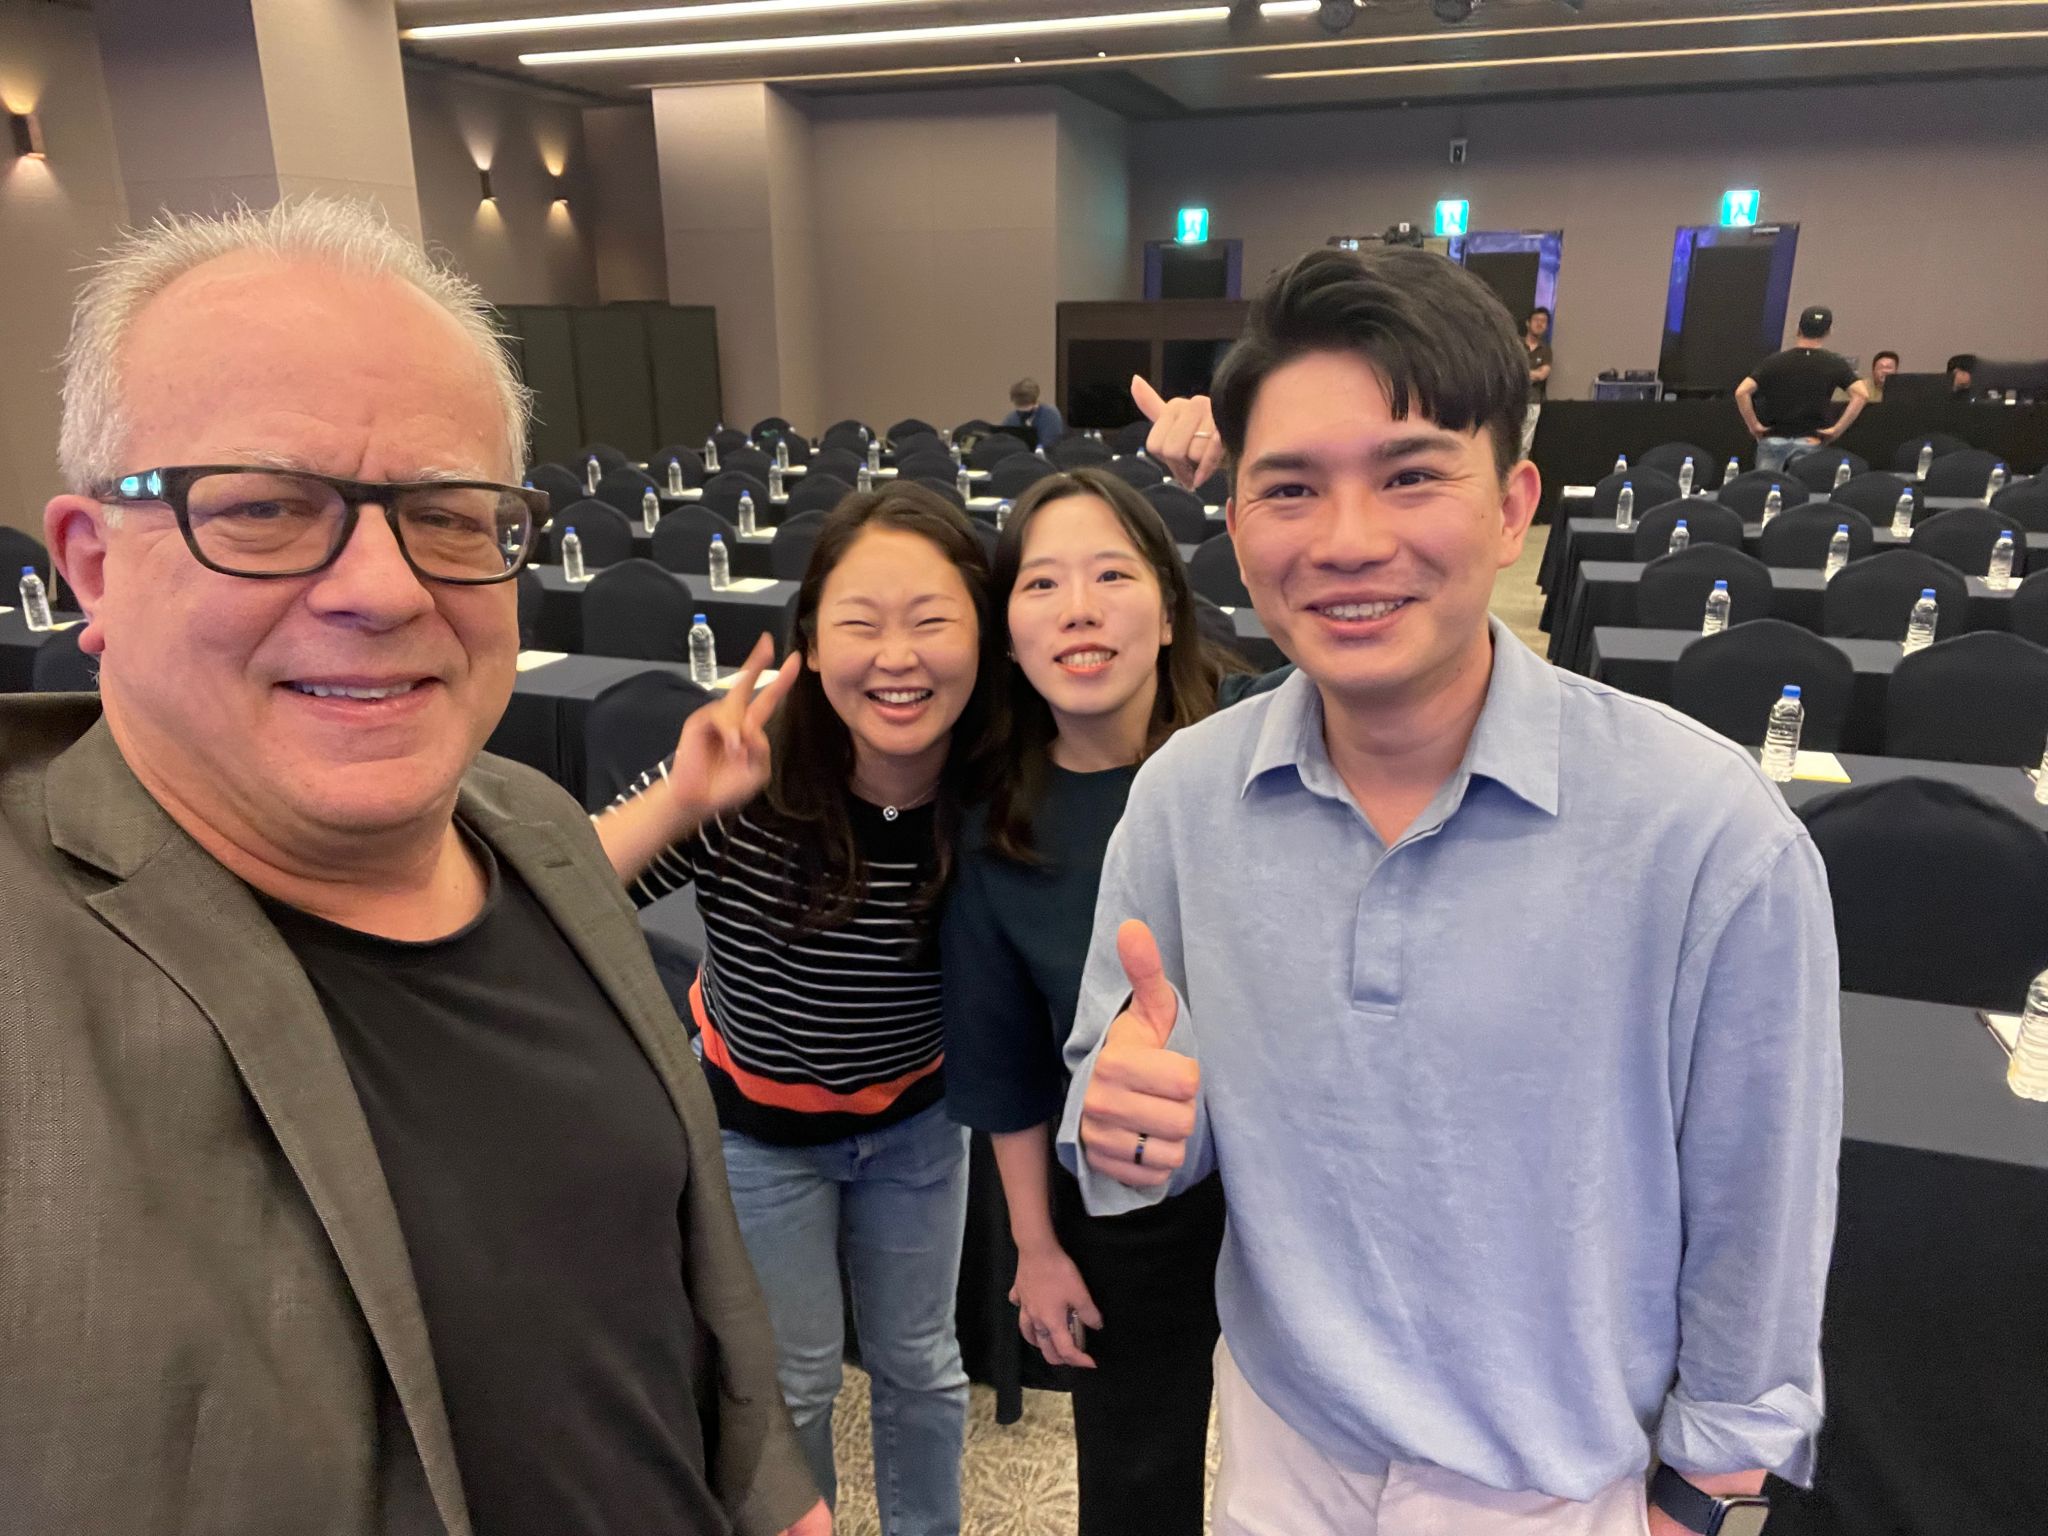 Some of the team responsible for organizing DEF 2023 along with Futurist Richard Yonck in Seoul, South Korea.